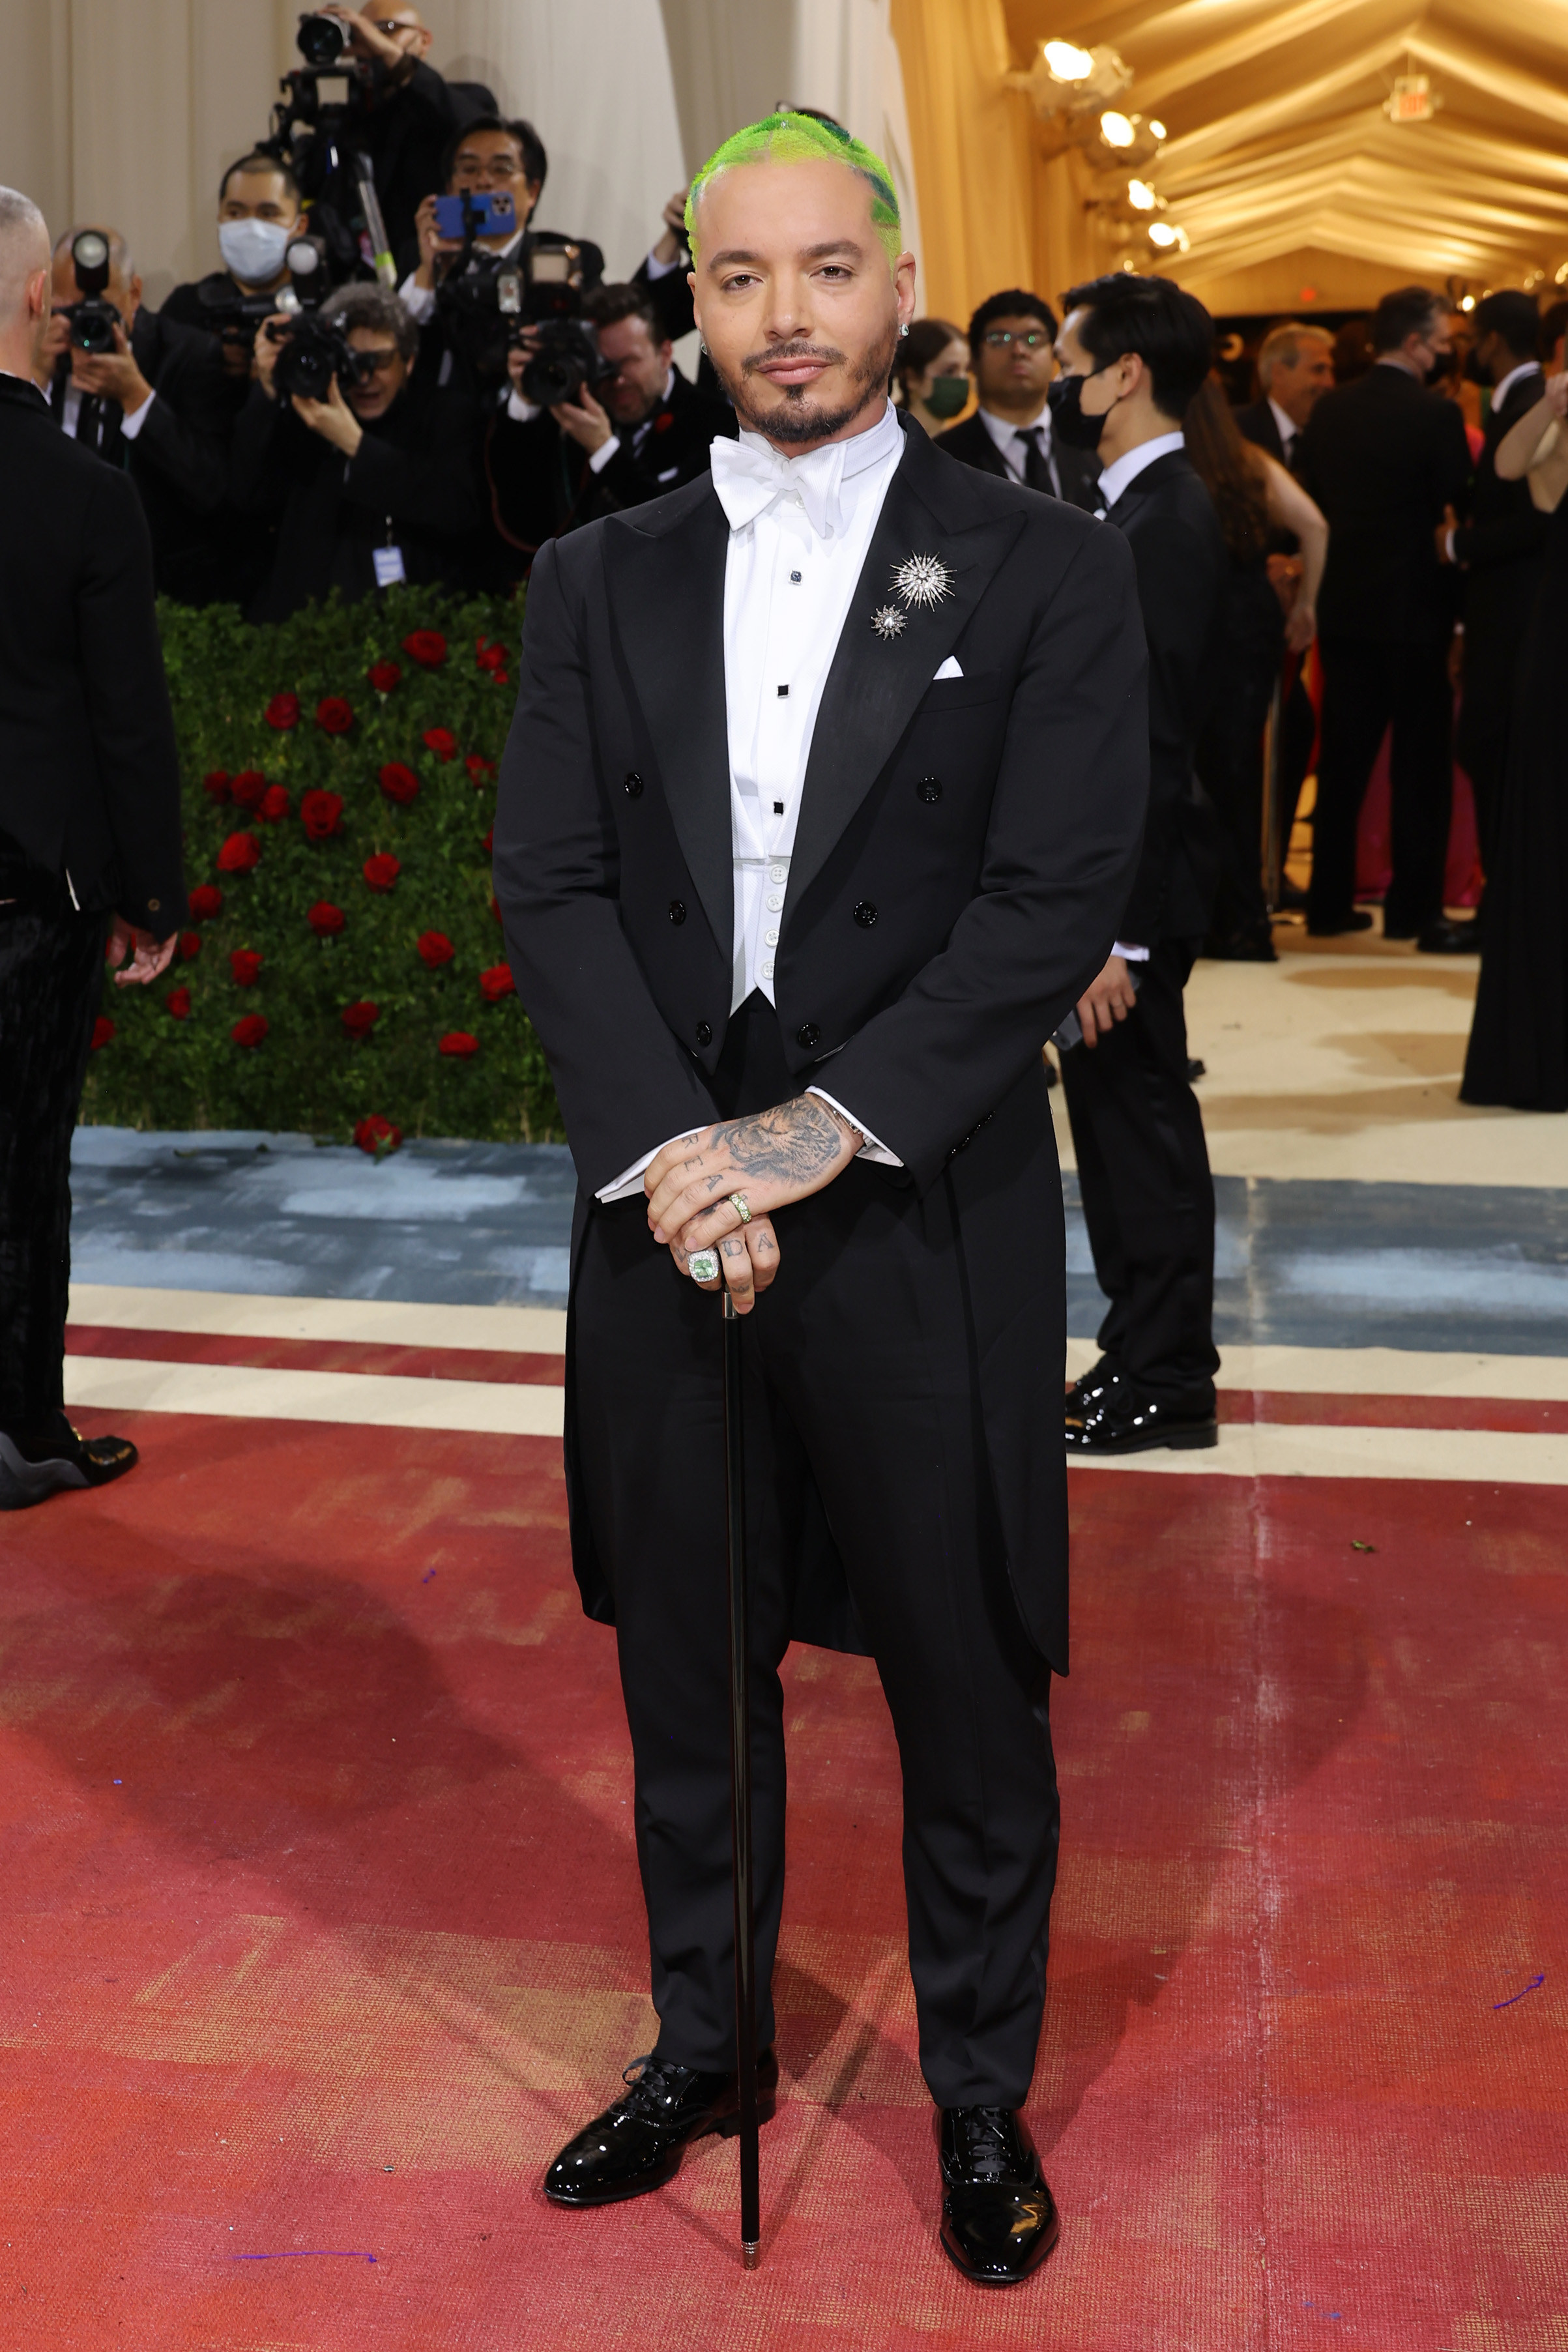 J Balvin in a long tux and bow tie holding a walking stick